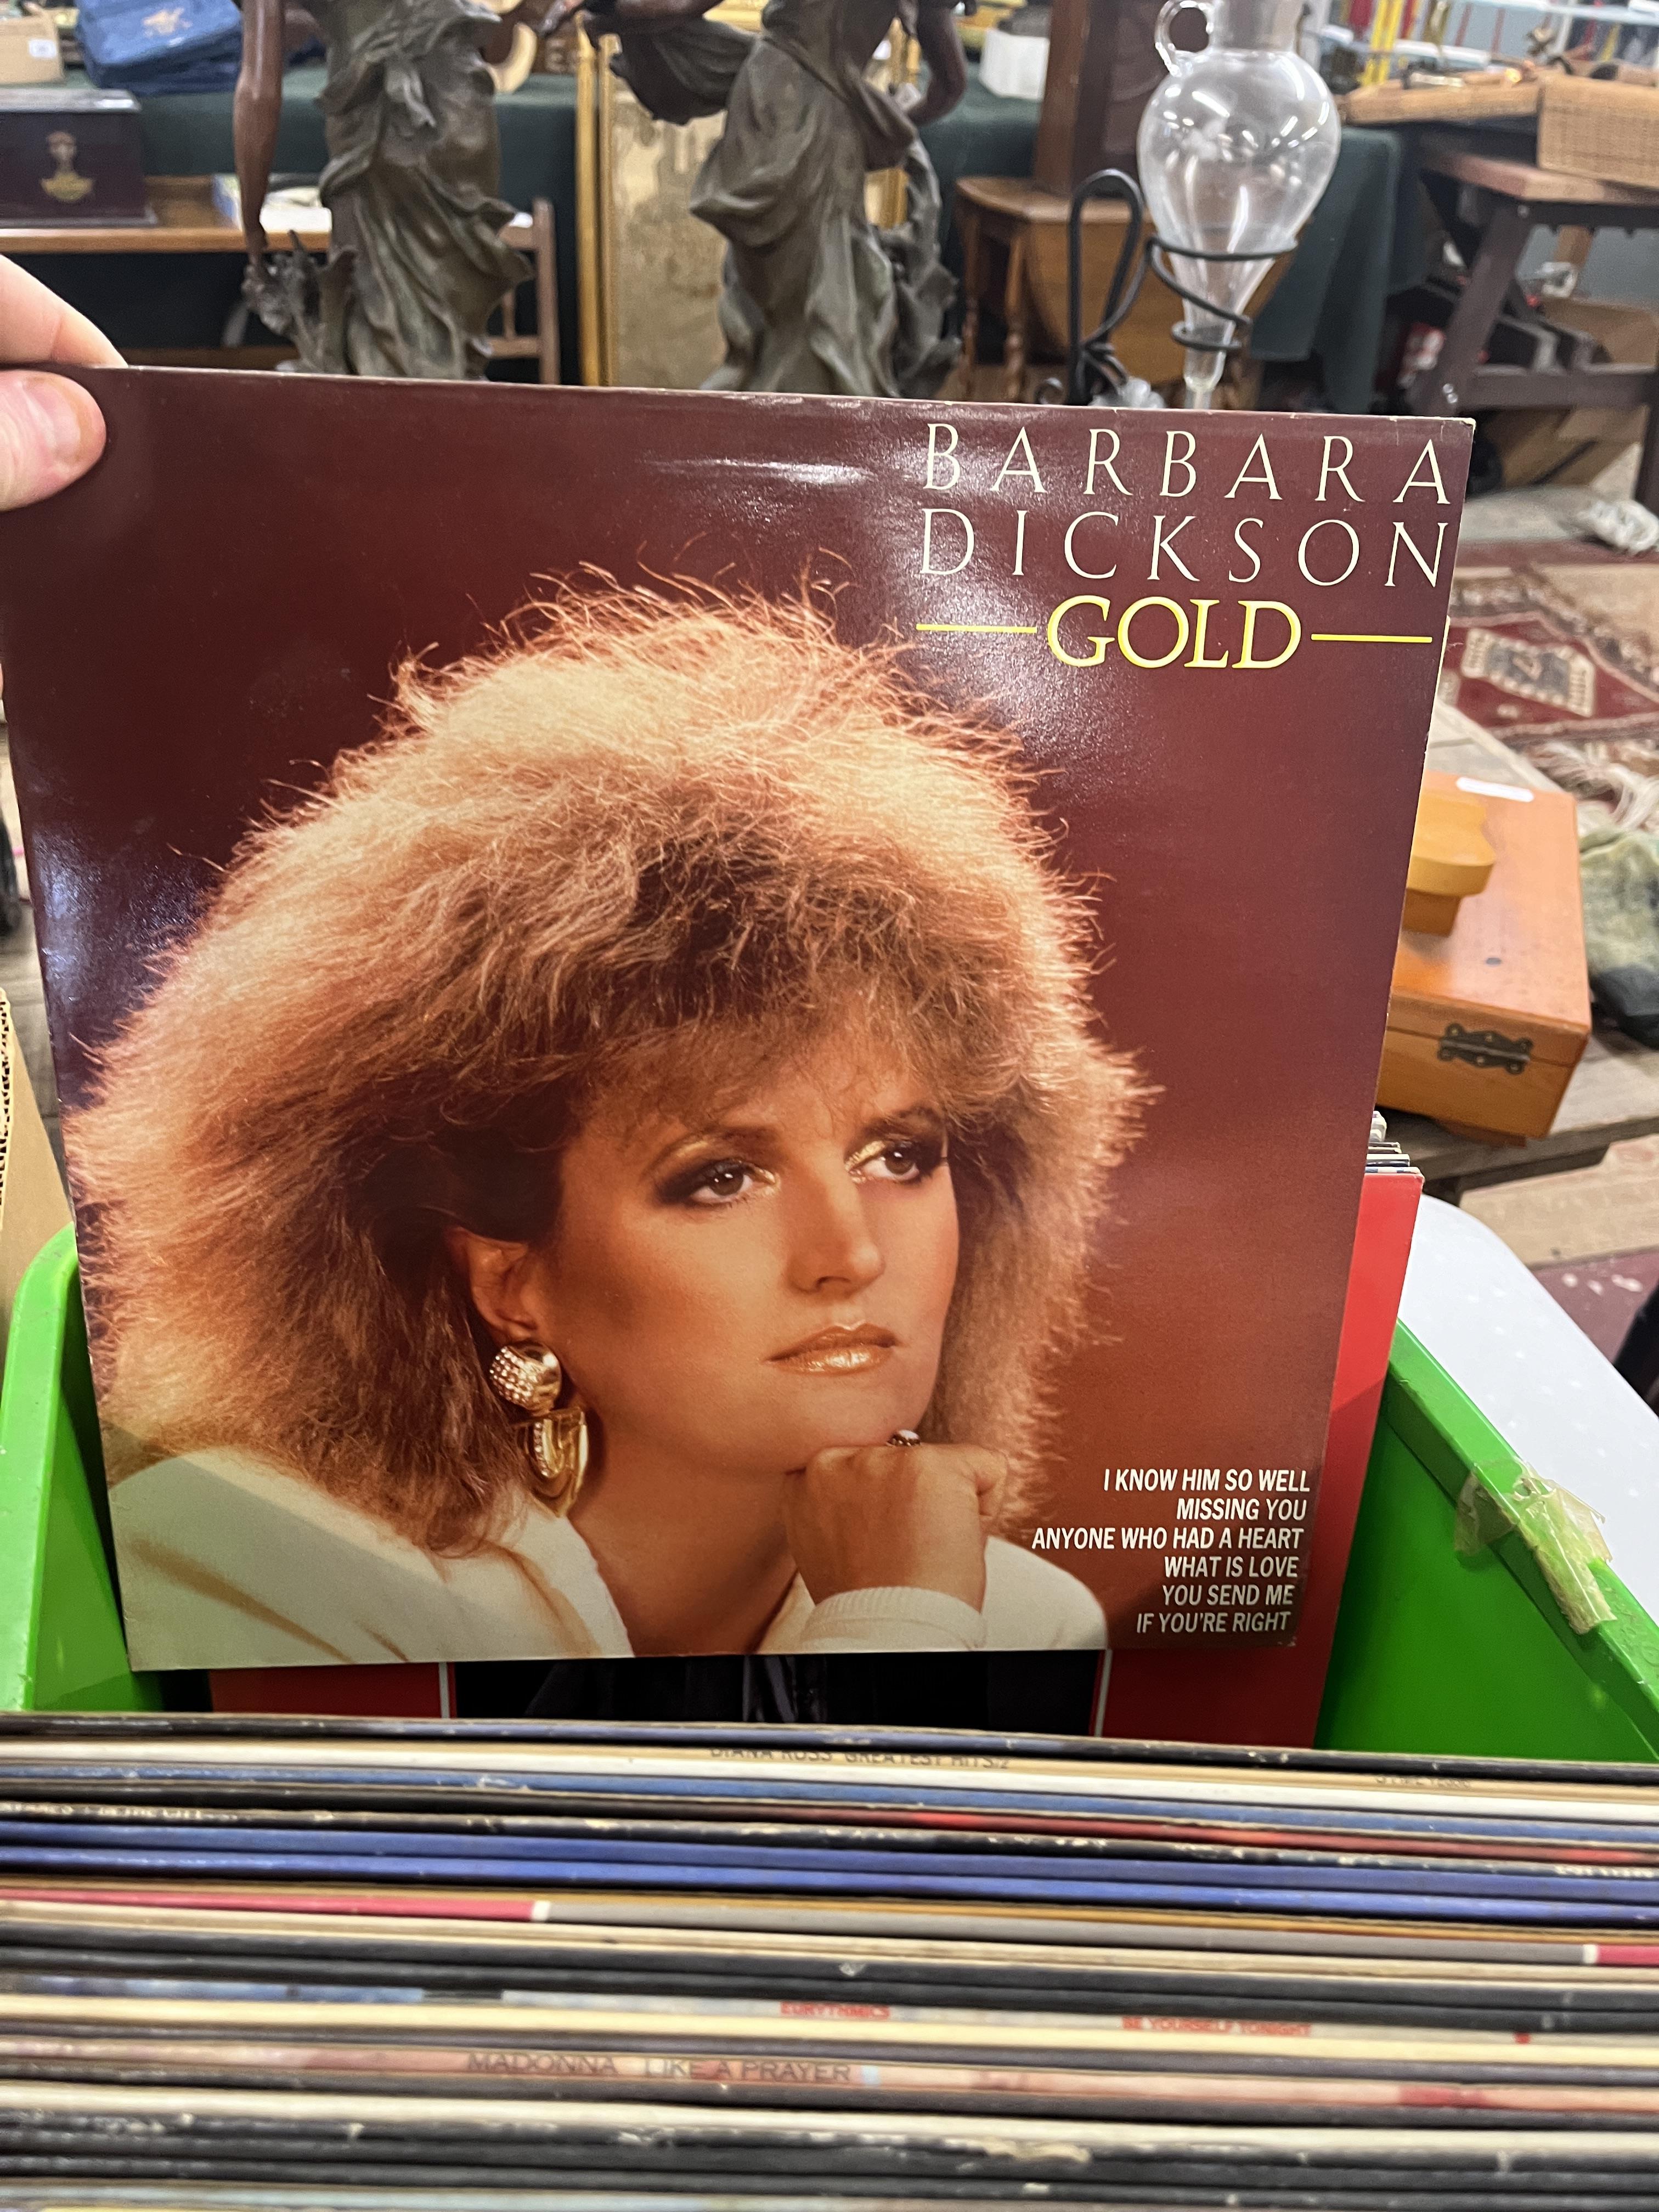 Collection of LPs to include Fleetwood Mac, Rod Stewart, etc. - Image 44 of 44